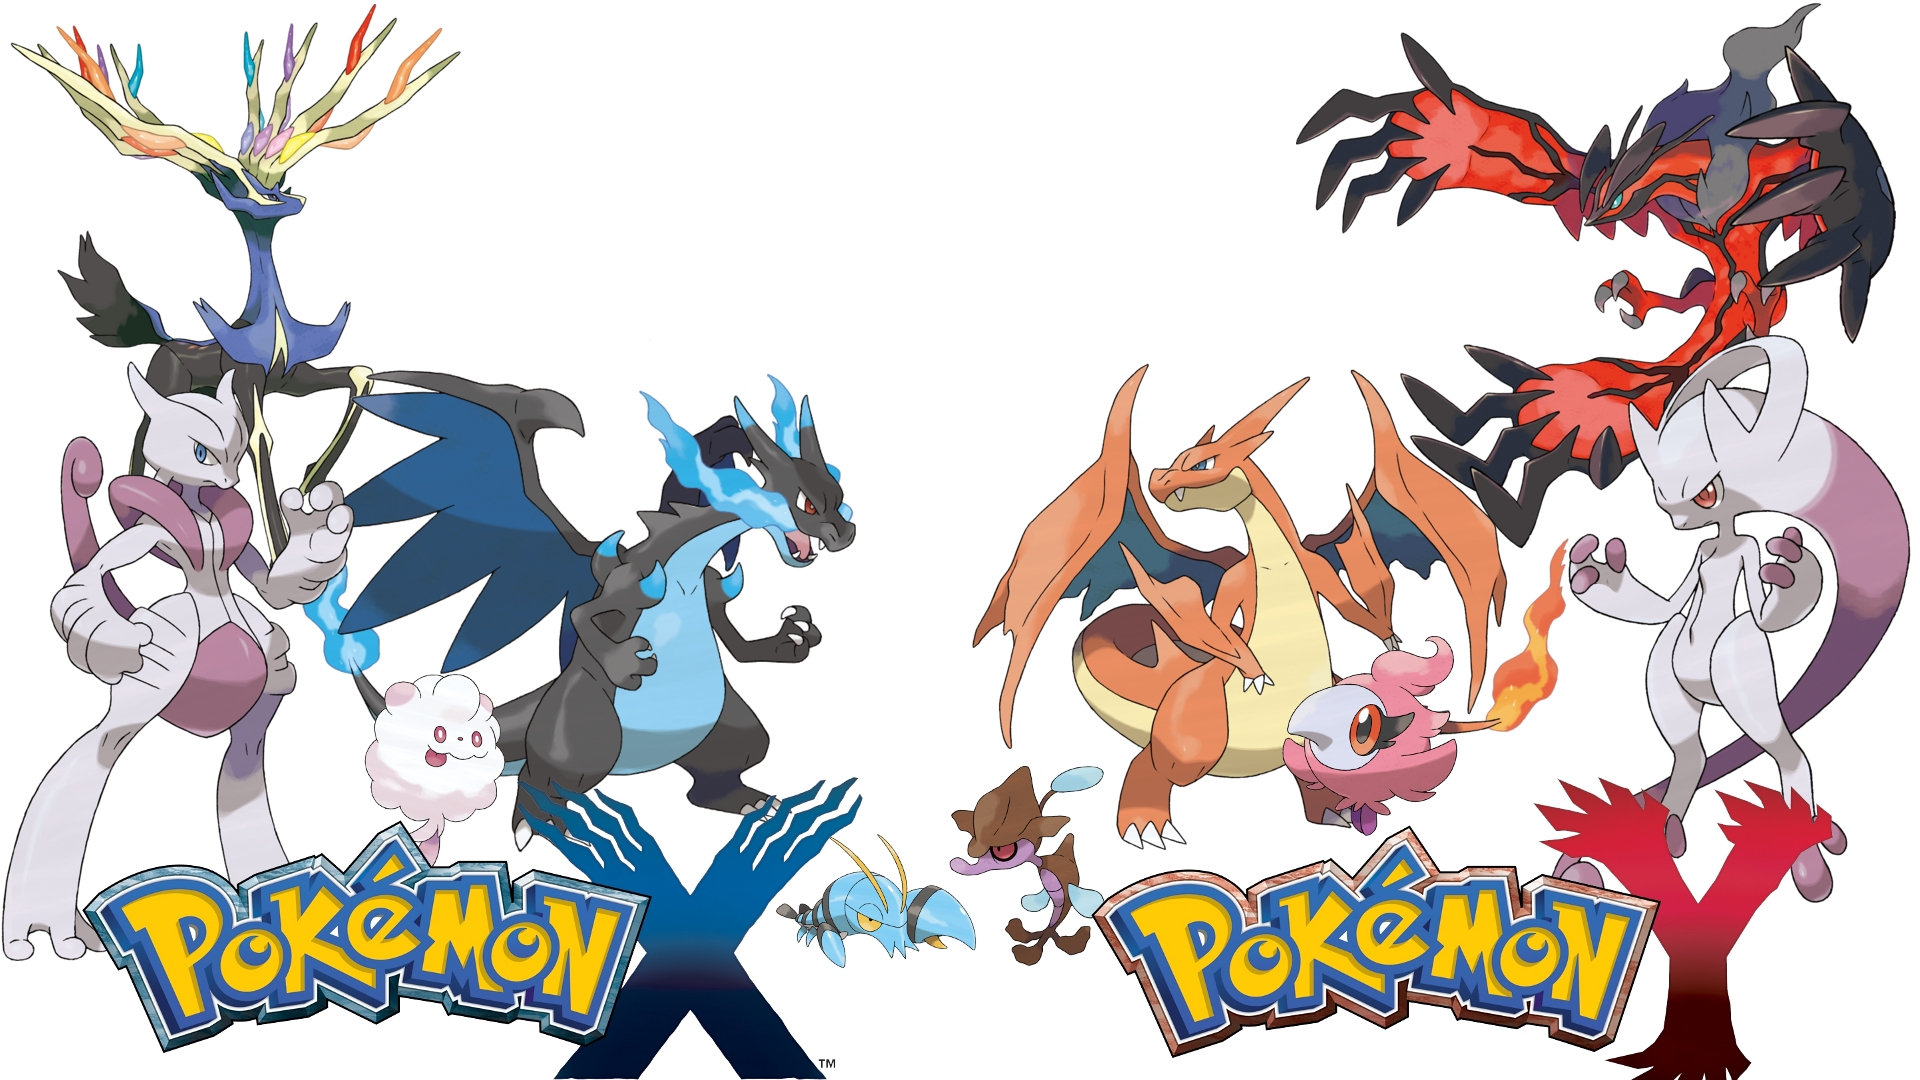 More Than 500 People Worked On Pokémon X And Pokémon Y - Siliconera